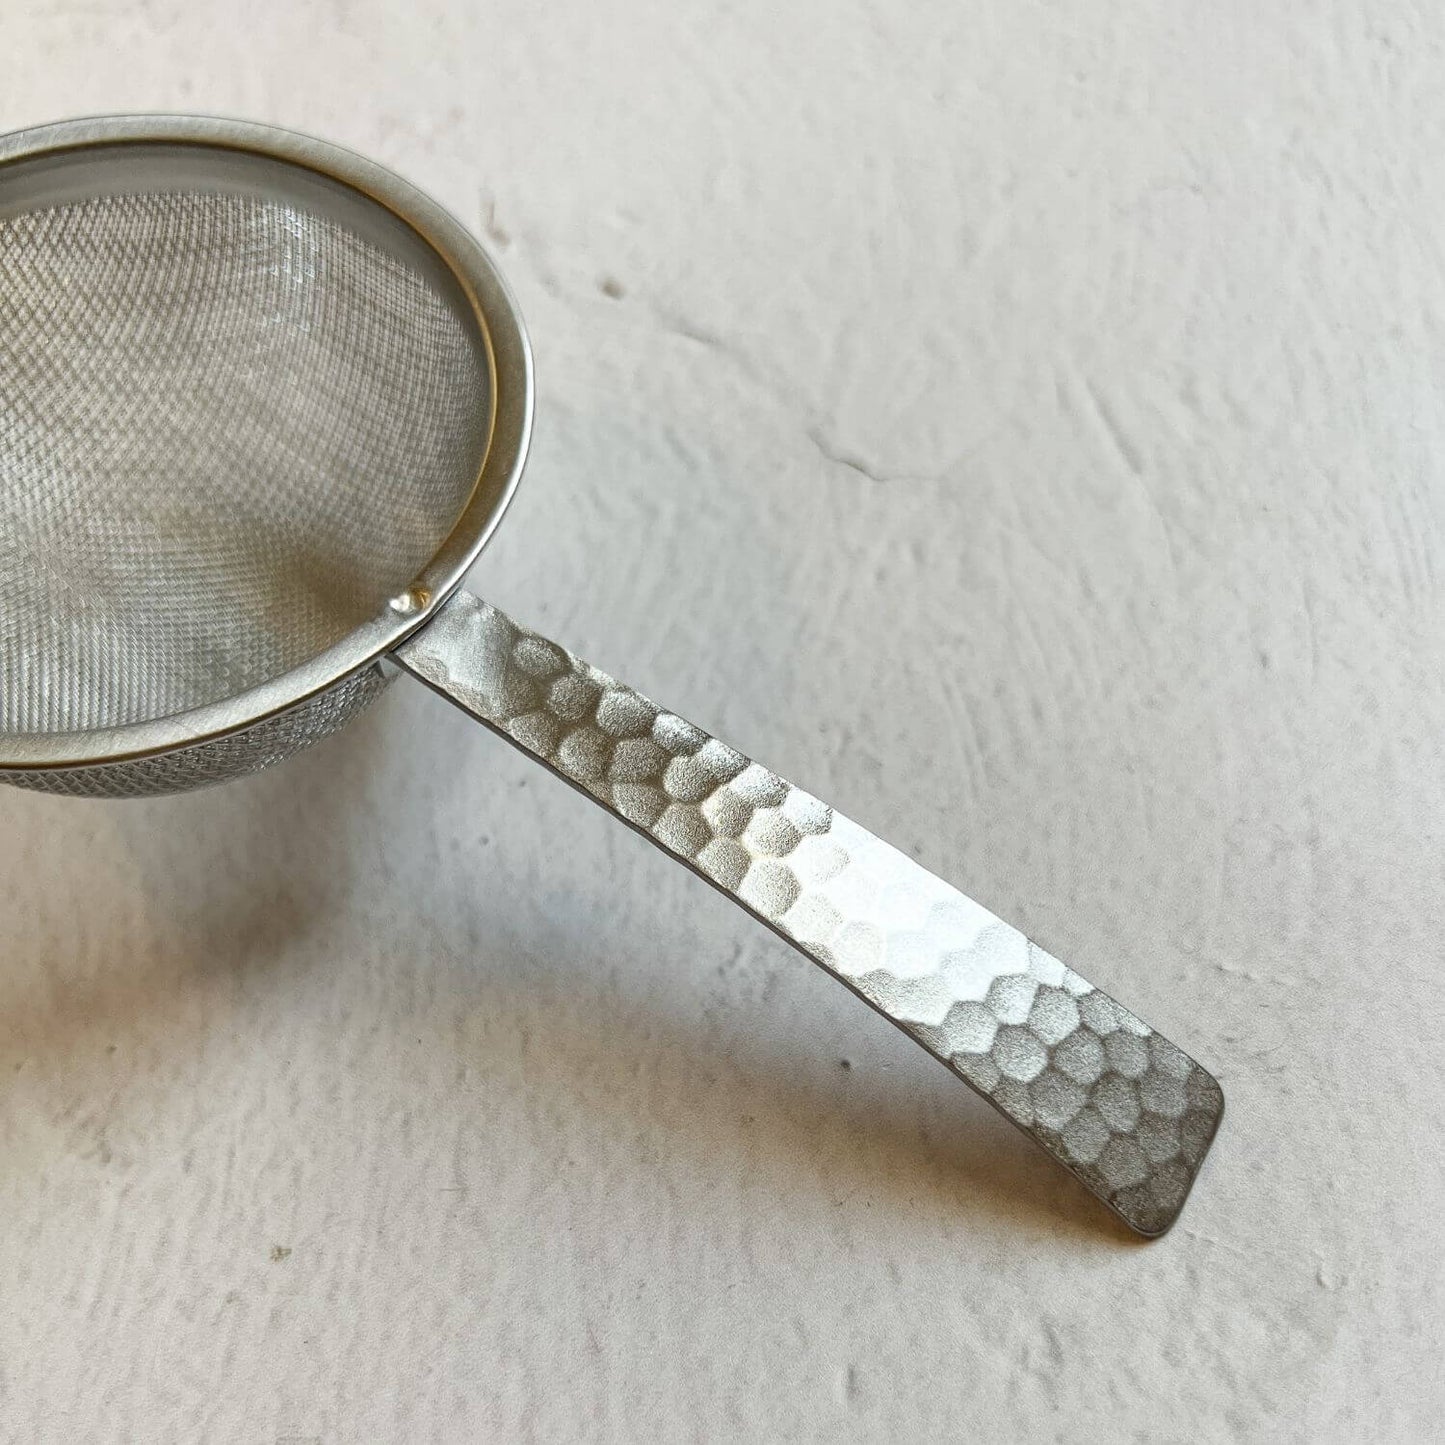 Stainless Steel Tea Strainer Made in Tsubame